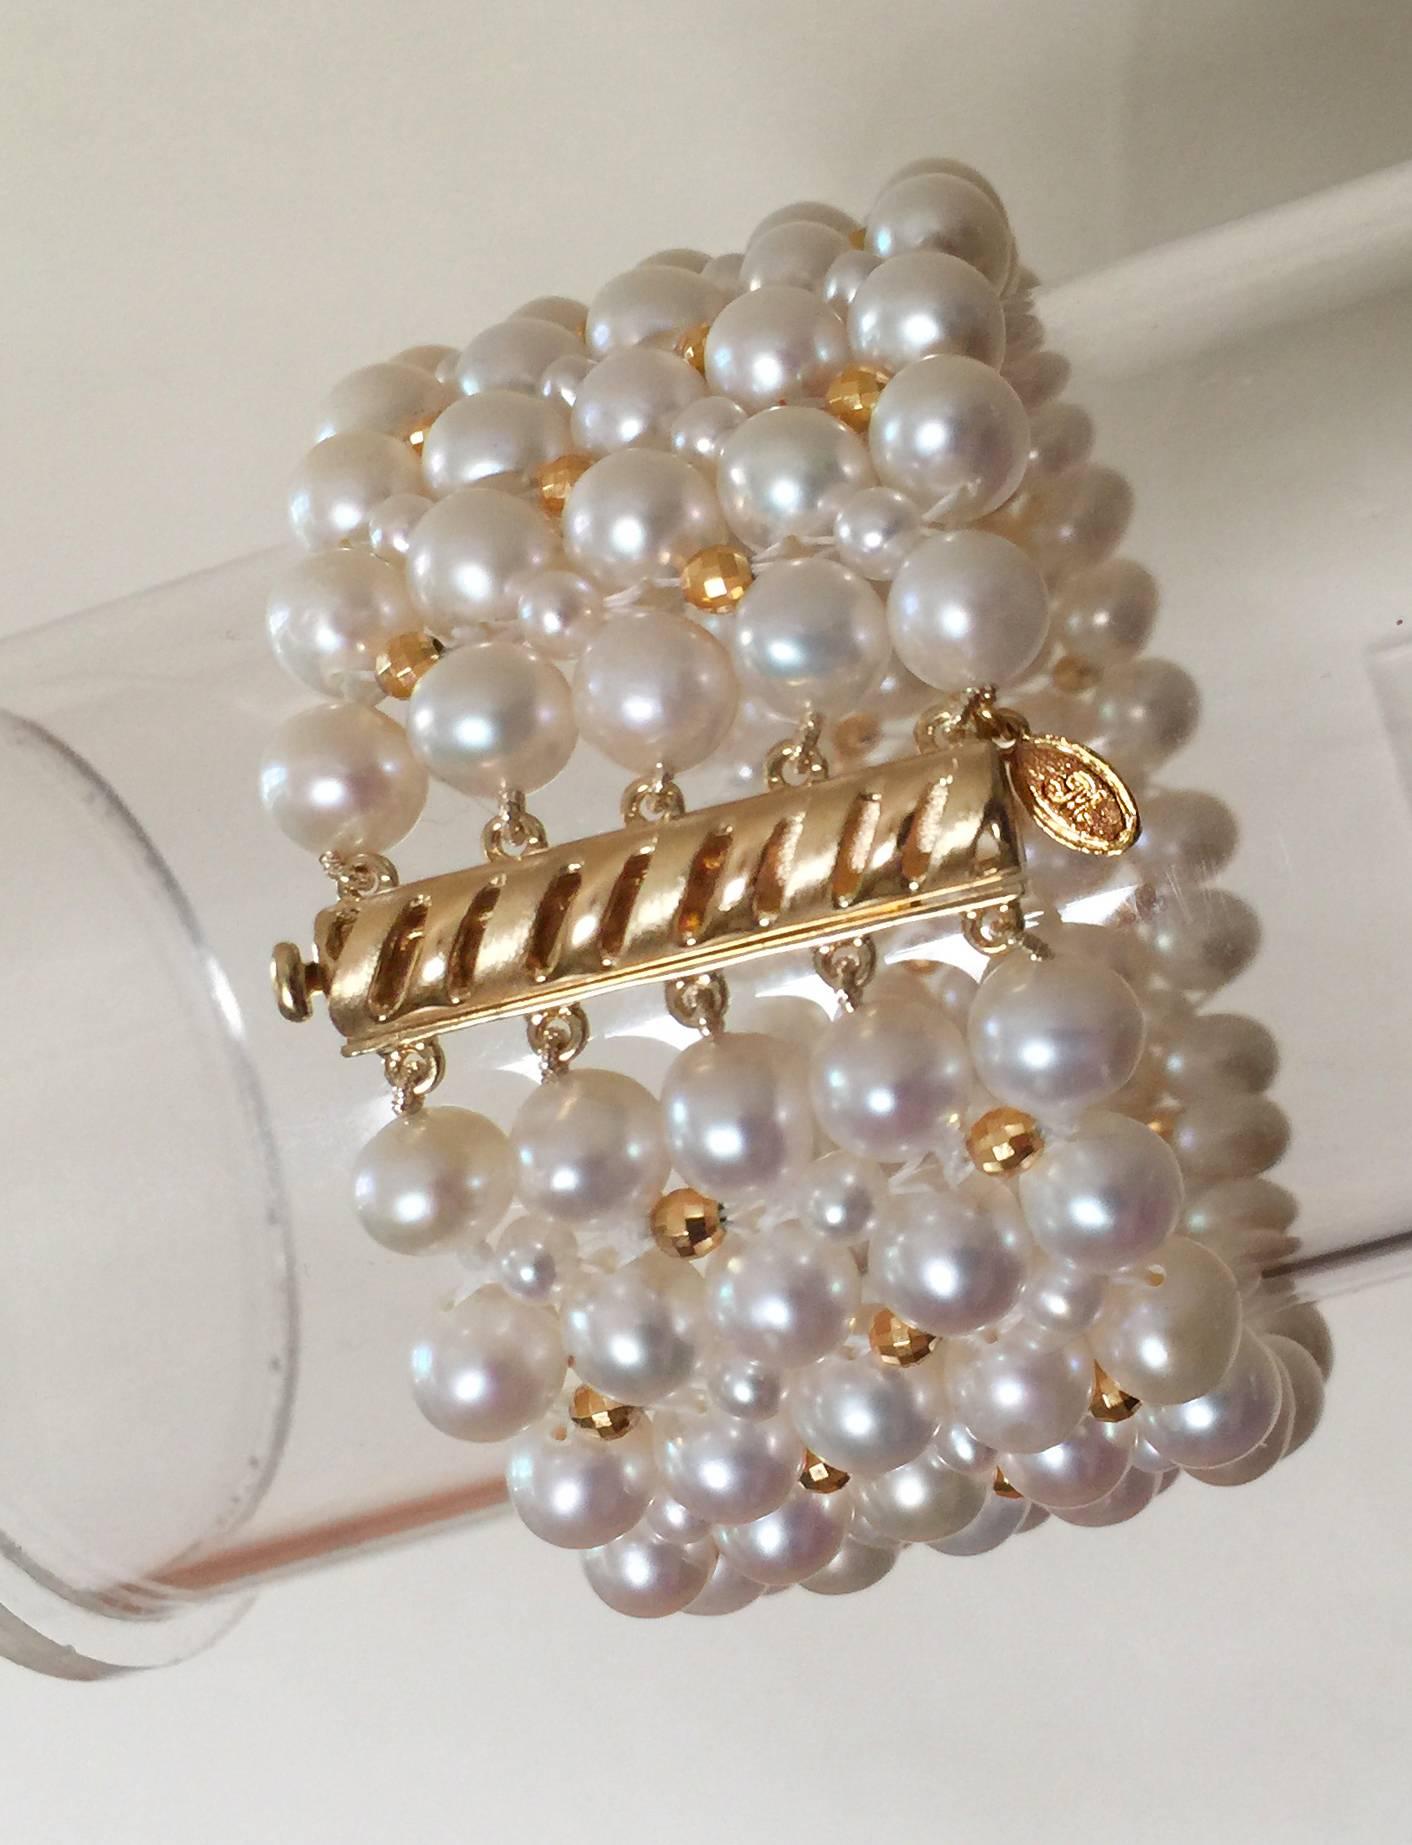 This timeless bracelet has an elegant pearl weave. At 1.25 inches wide the different size pearls create a checkered design with the 14 k  yellow gold plated faceted beads. 
The bracelet is 7.25 inches and fits comfortably on the wrist like a band.